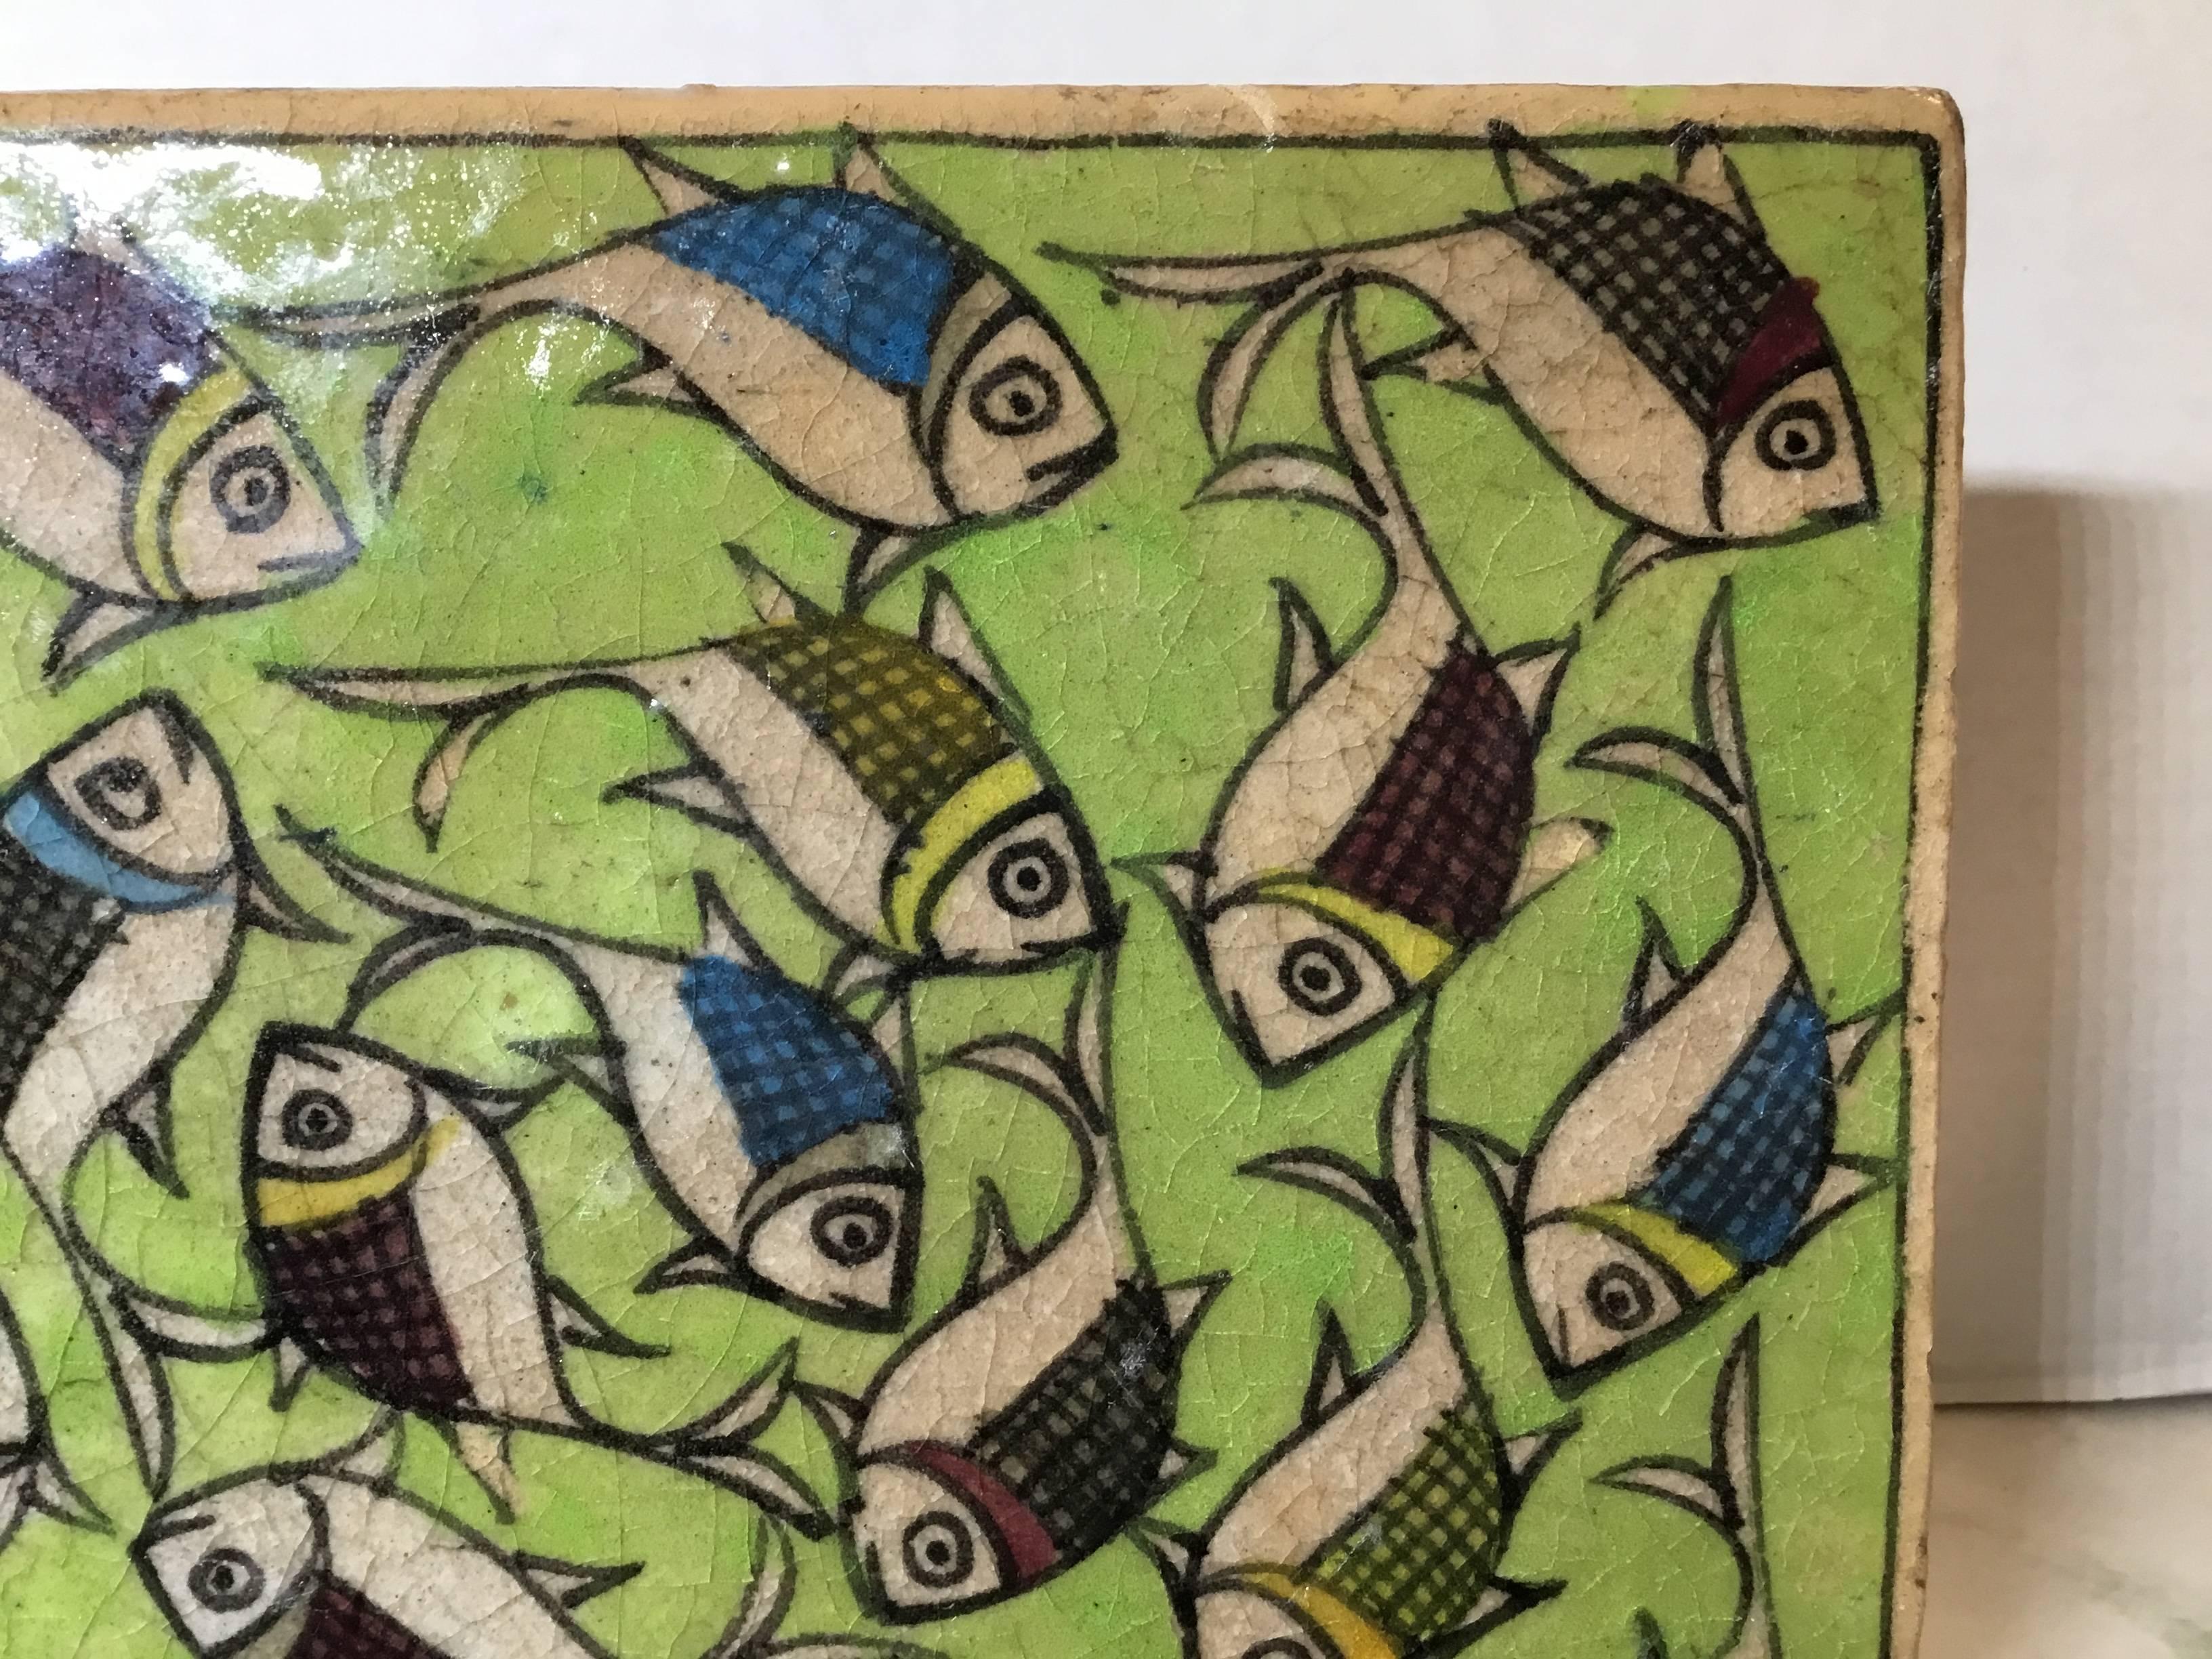 Beautiful Persian tile hand painted and glazed, with exceptional colorful wondering school of fish on a green color background.
You can hang the tile on the wall or display it on a custom made iron display piece. Display piece included.